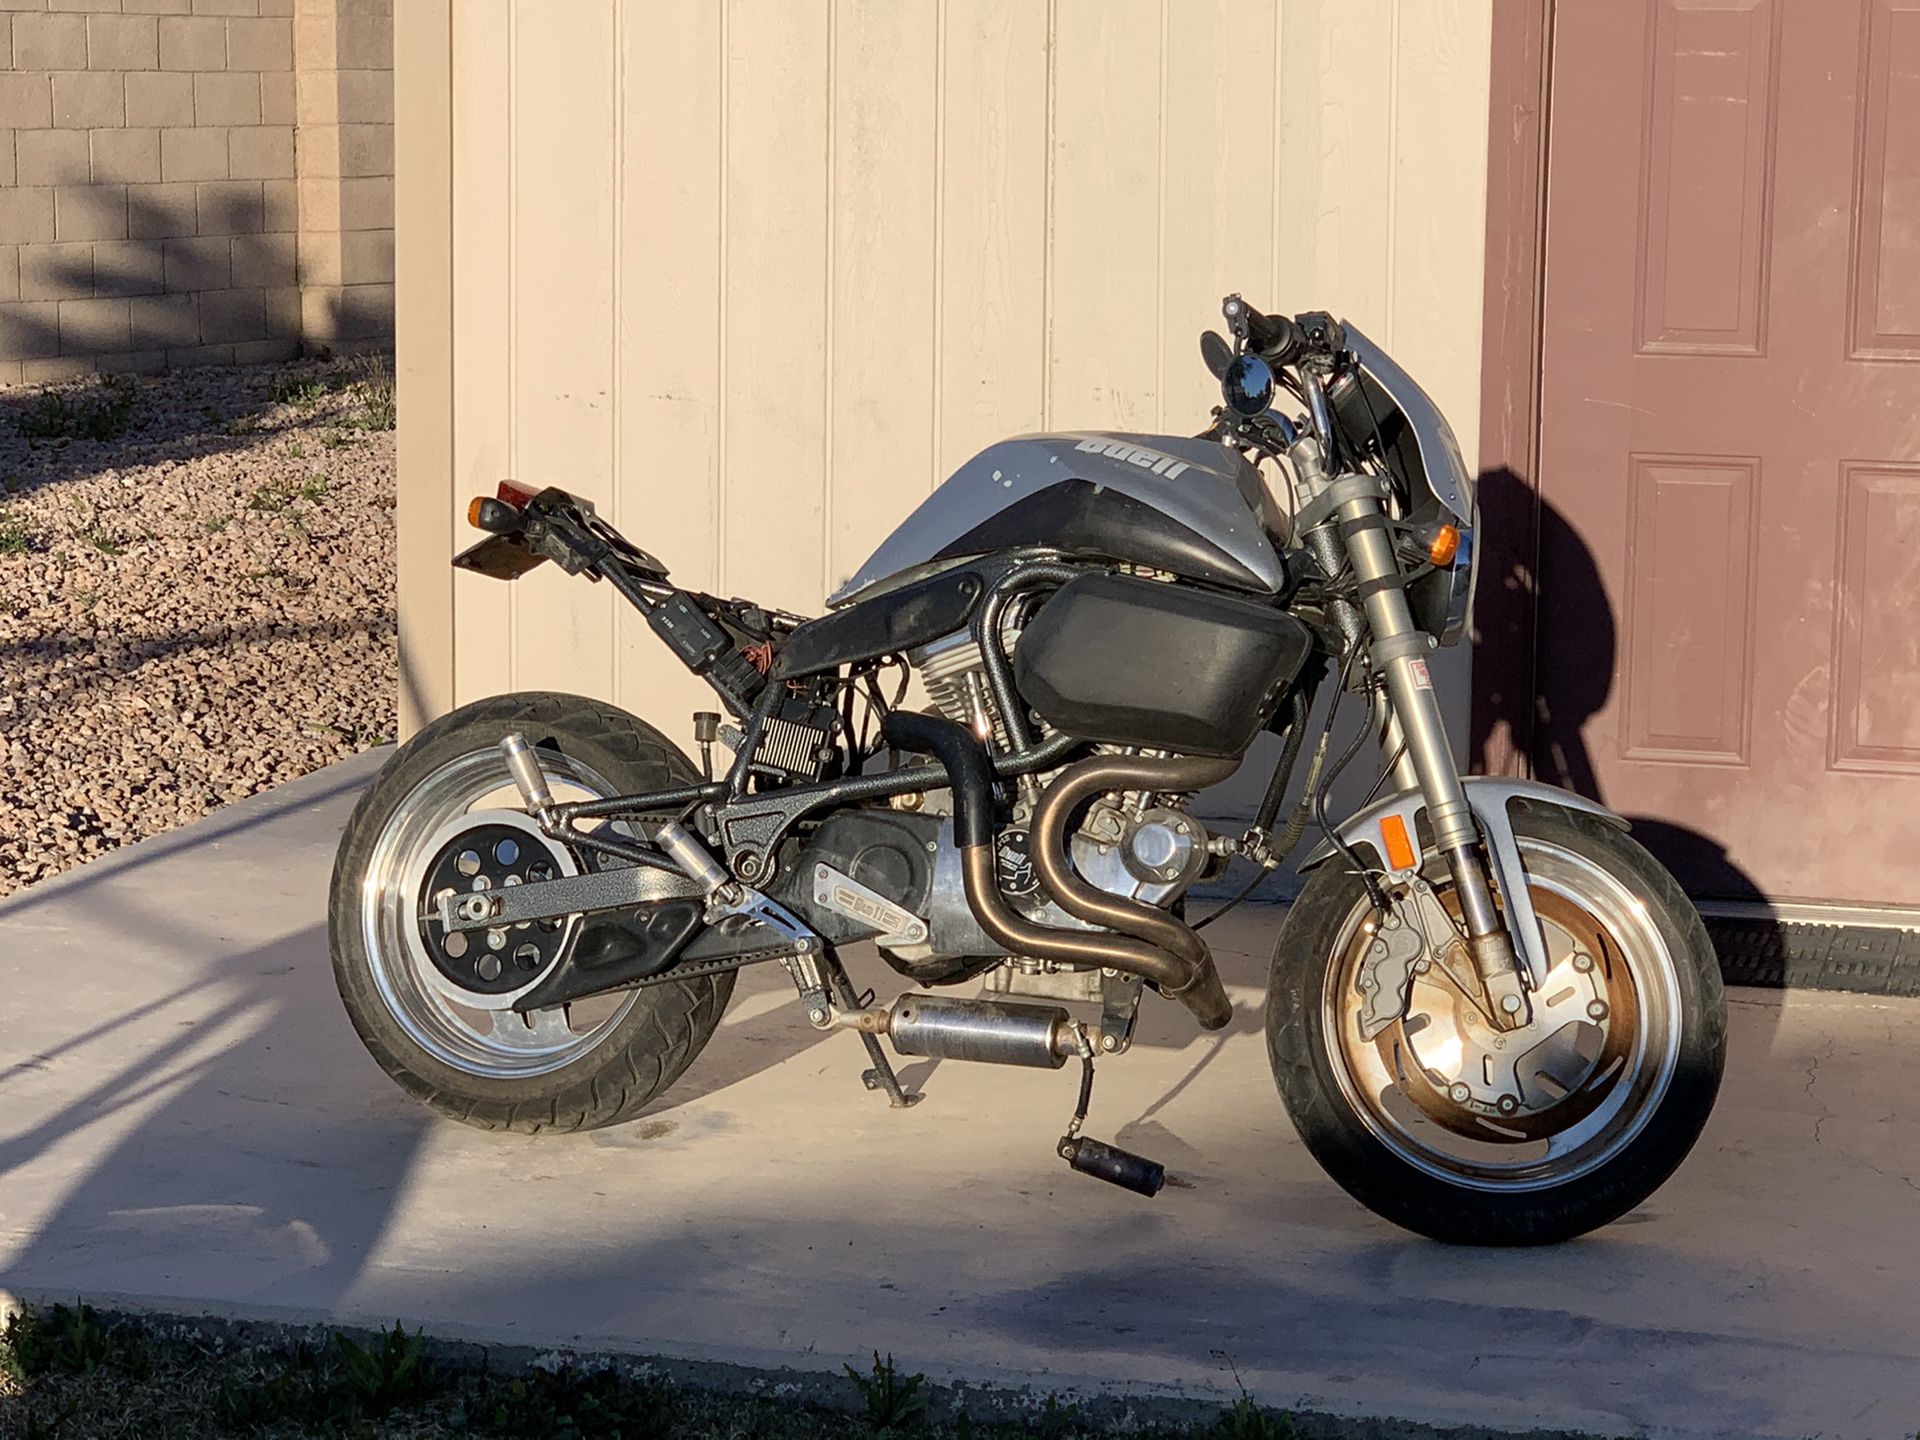 1997 Buell S1 lightning for Sale in Peoria, AZ - OfferUp